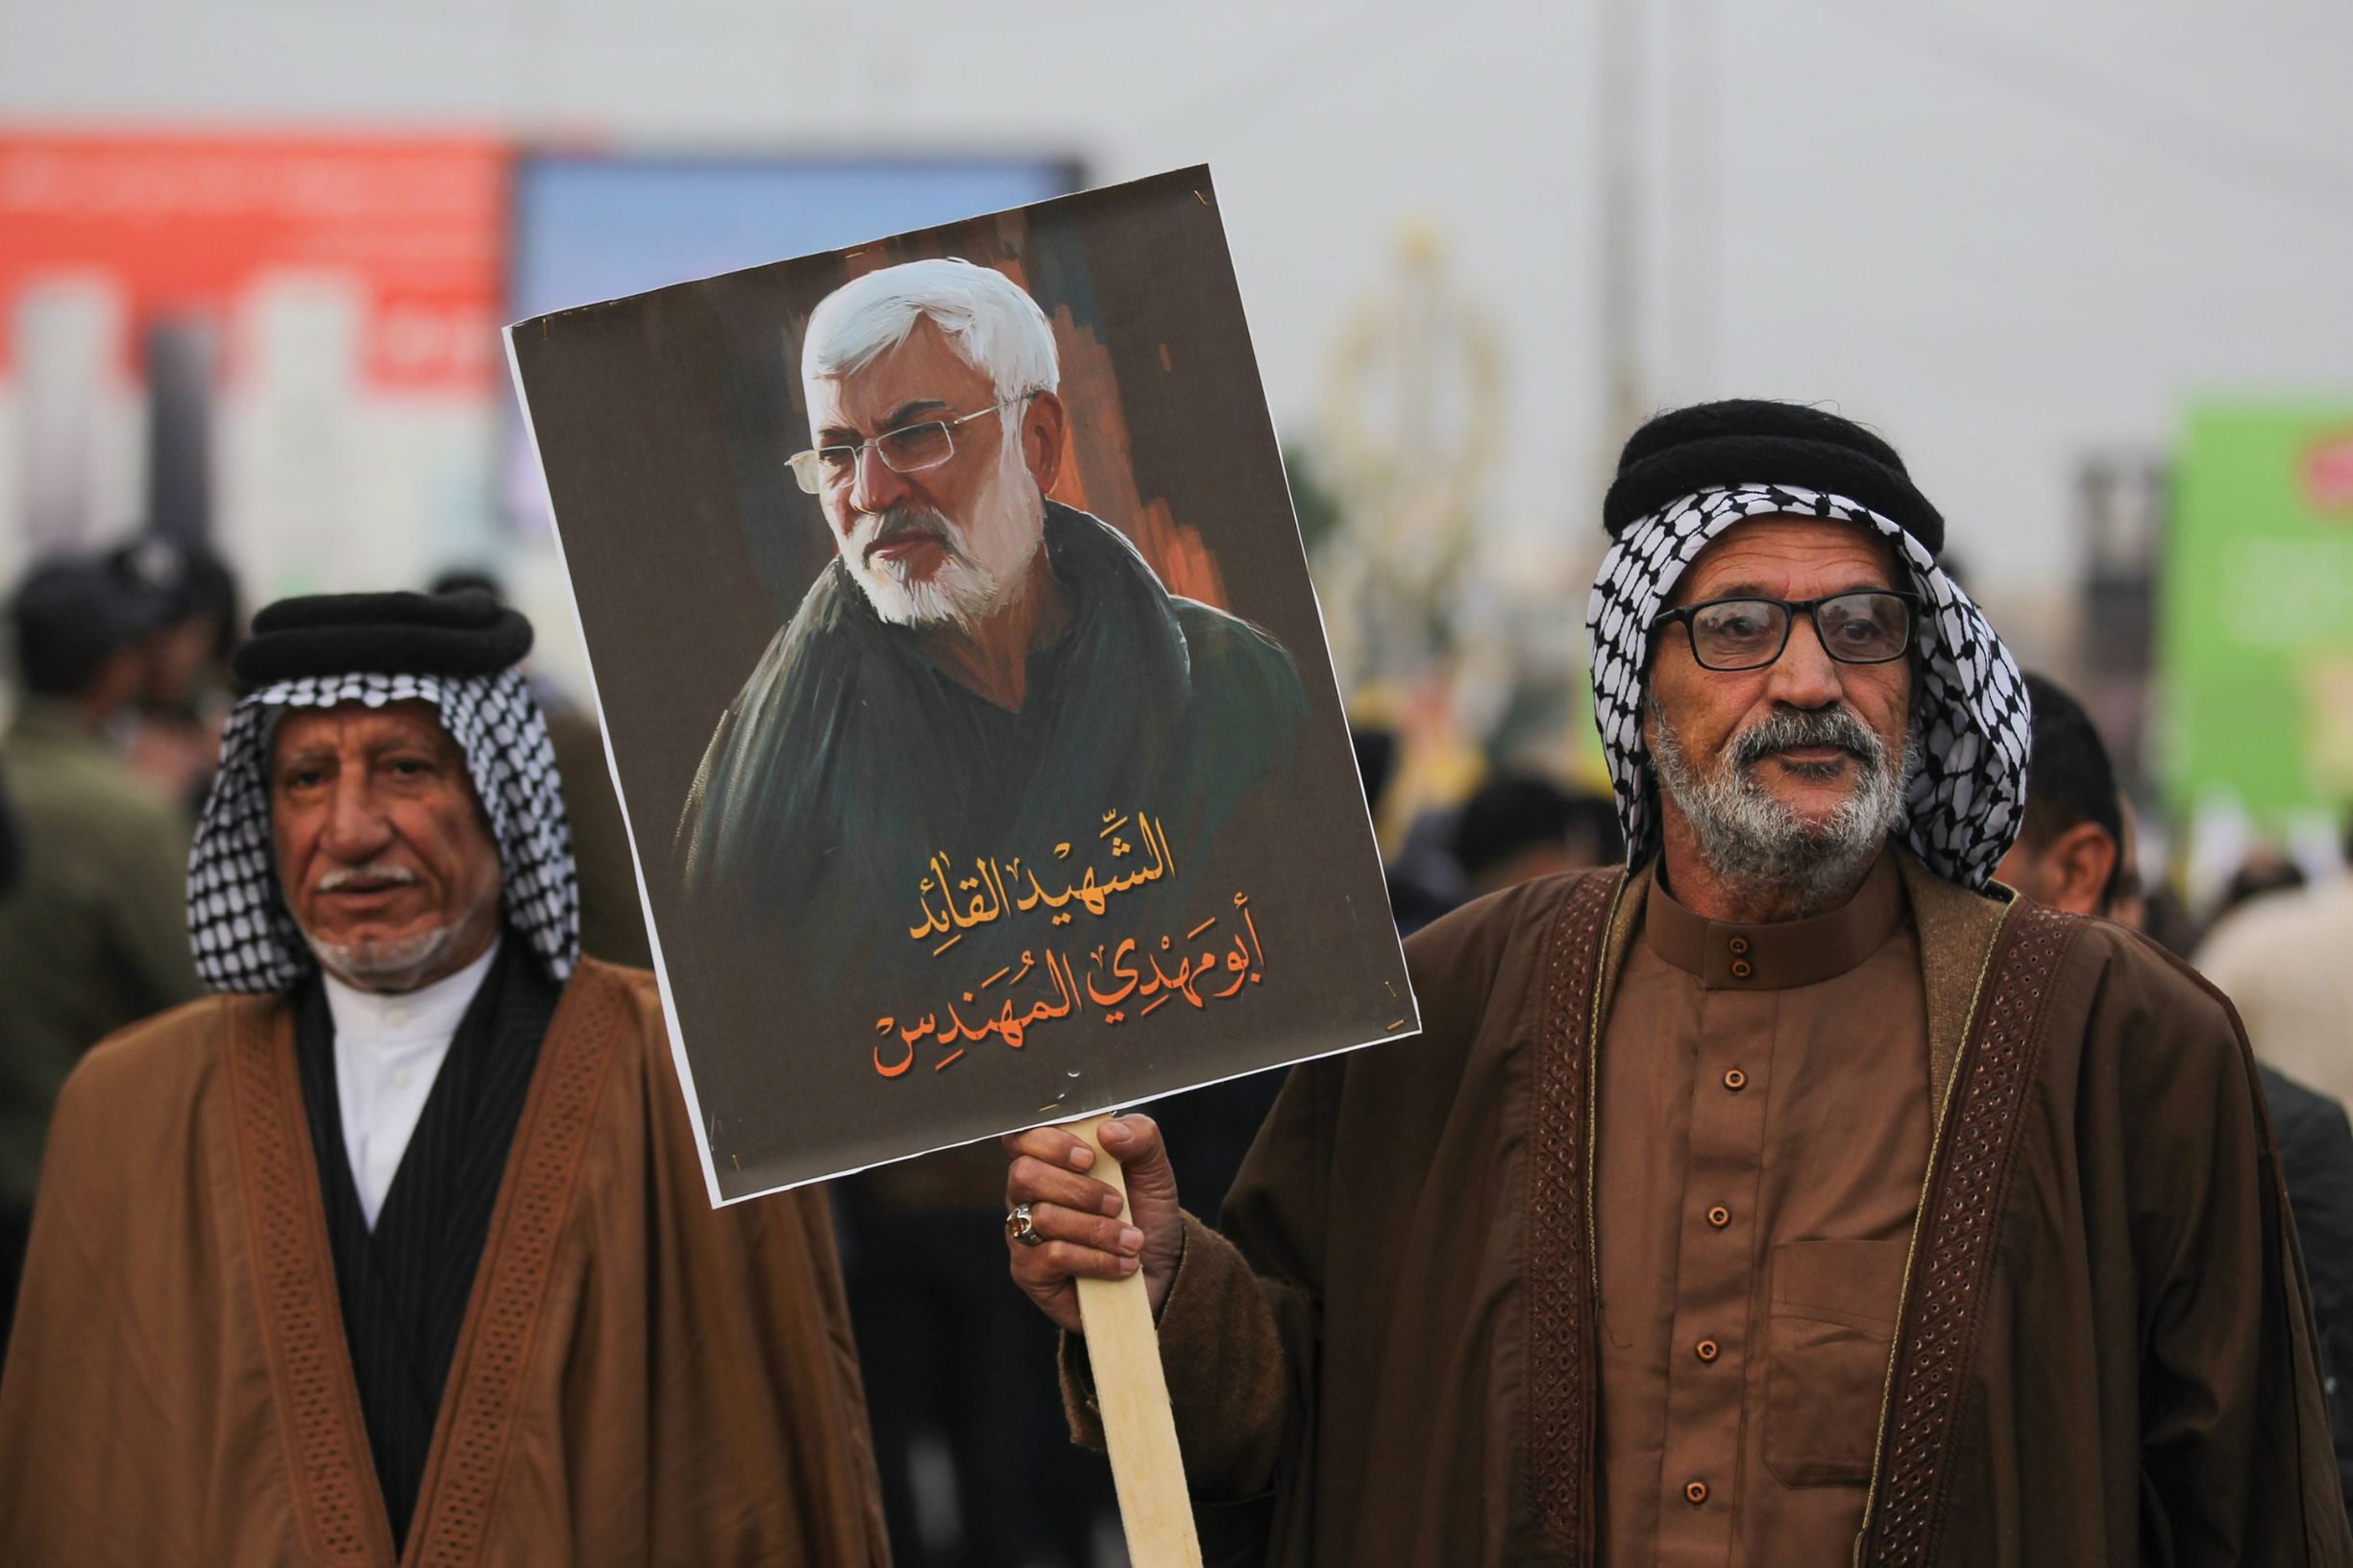 Supporters of the Hashed al-Shaabi paramilitary force and Iraq's Hezbollah brigades attend the funeral of Iranian military commander Qasem Soleimani and Iraqi paramilitary chief Abu Mahdi al-Muhandis (portrait) in Baghdad's district of al-Jadriya, in Baghdad's high-security Green Zone, on January 4, 2020. - Thousands of Iraqis chanting 